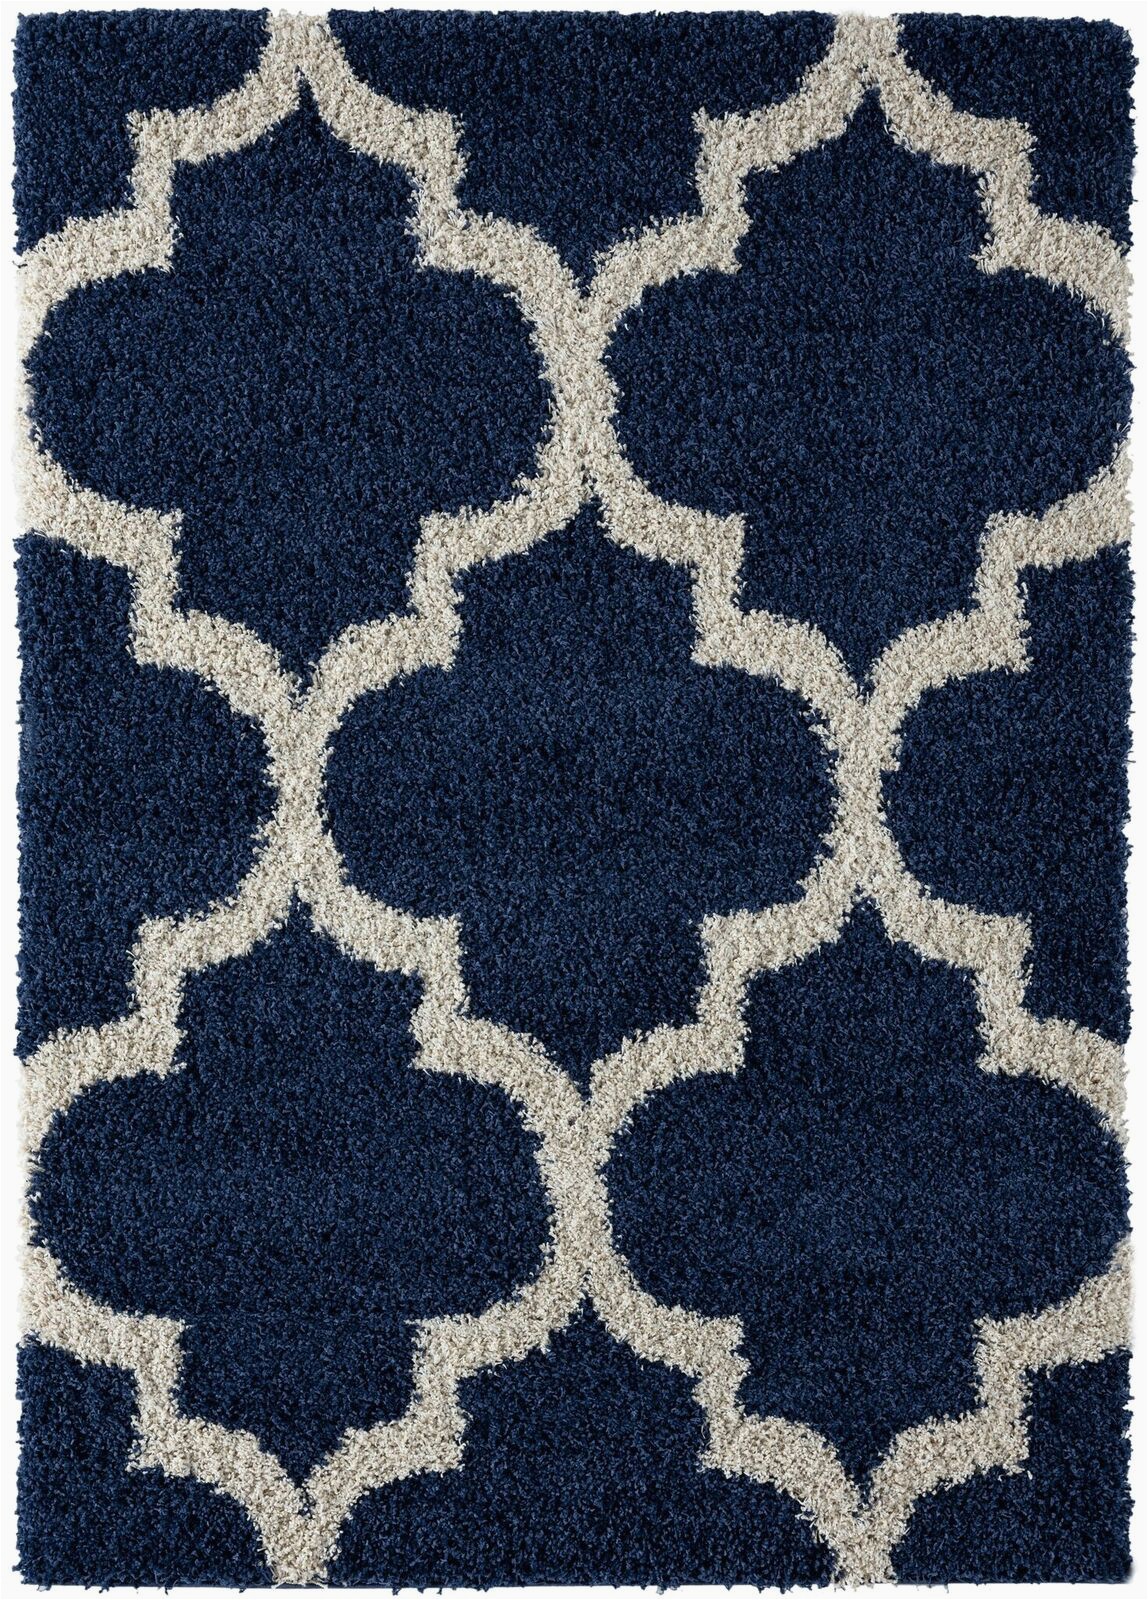 Better Homes and Gardens 5×7 area Rugs 116 Moroccan Navy Blue Shag Trellis Shag area Rug soft and Plush Pile 5×7 8×11